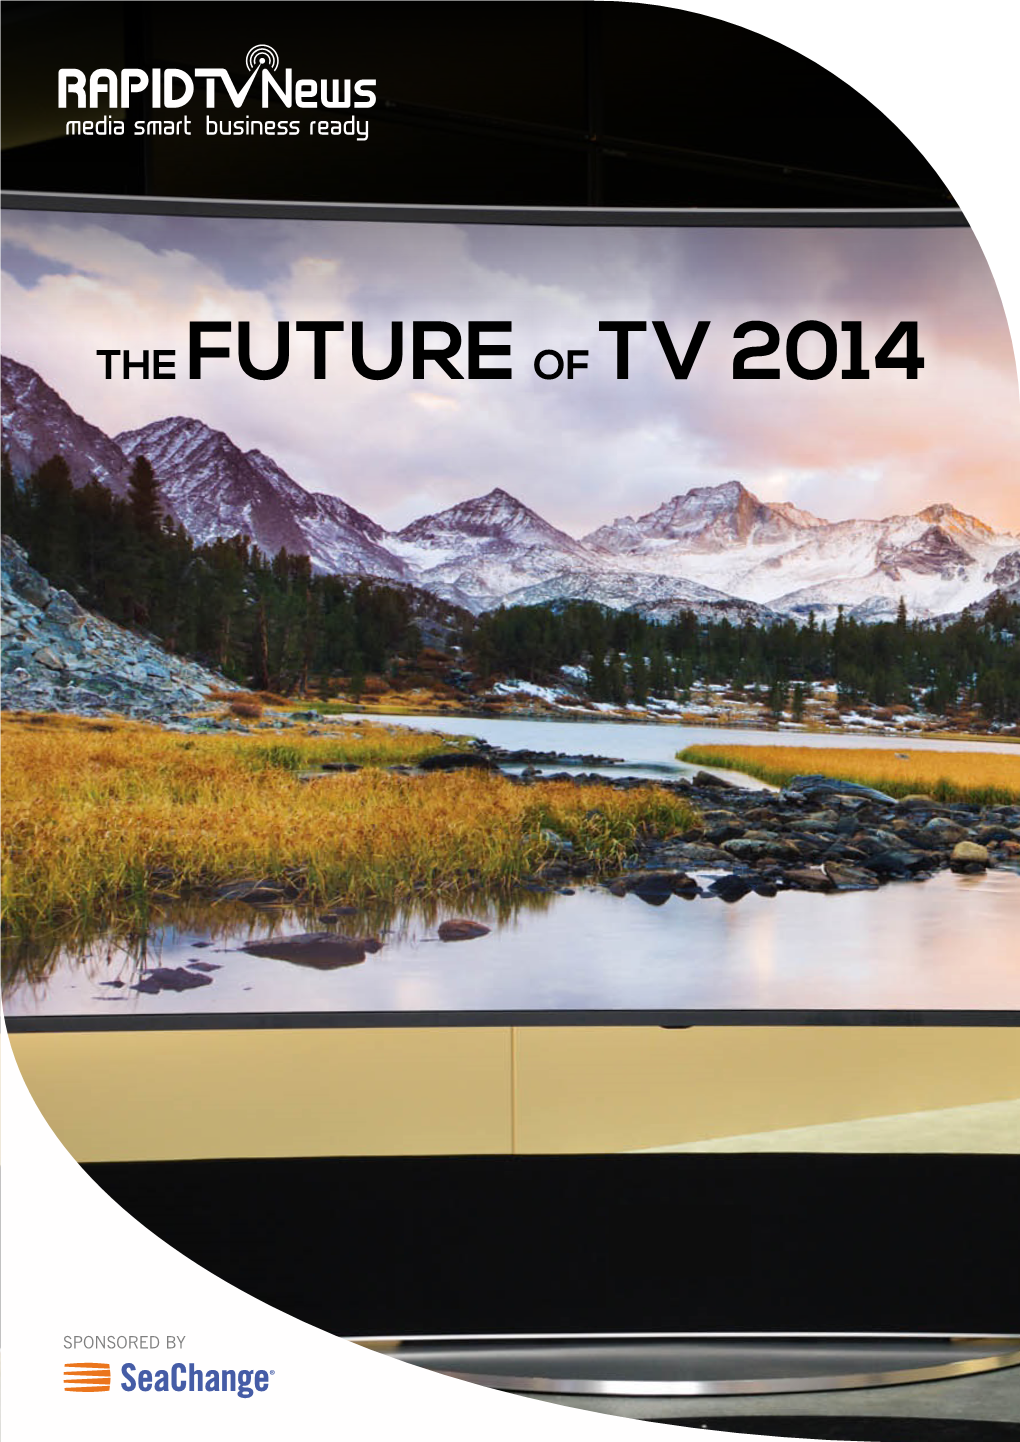 The Future of Tv 2014